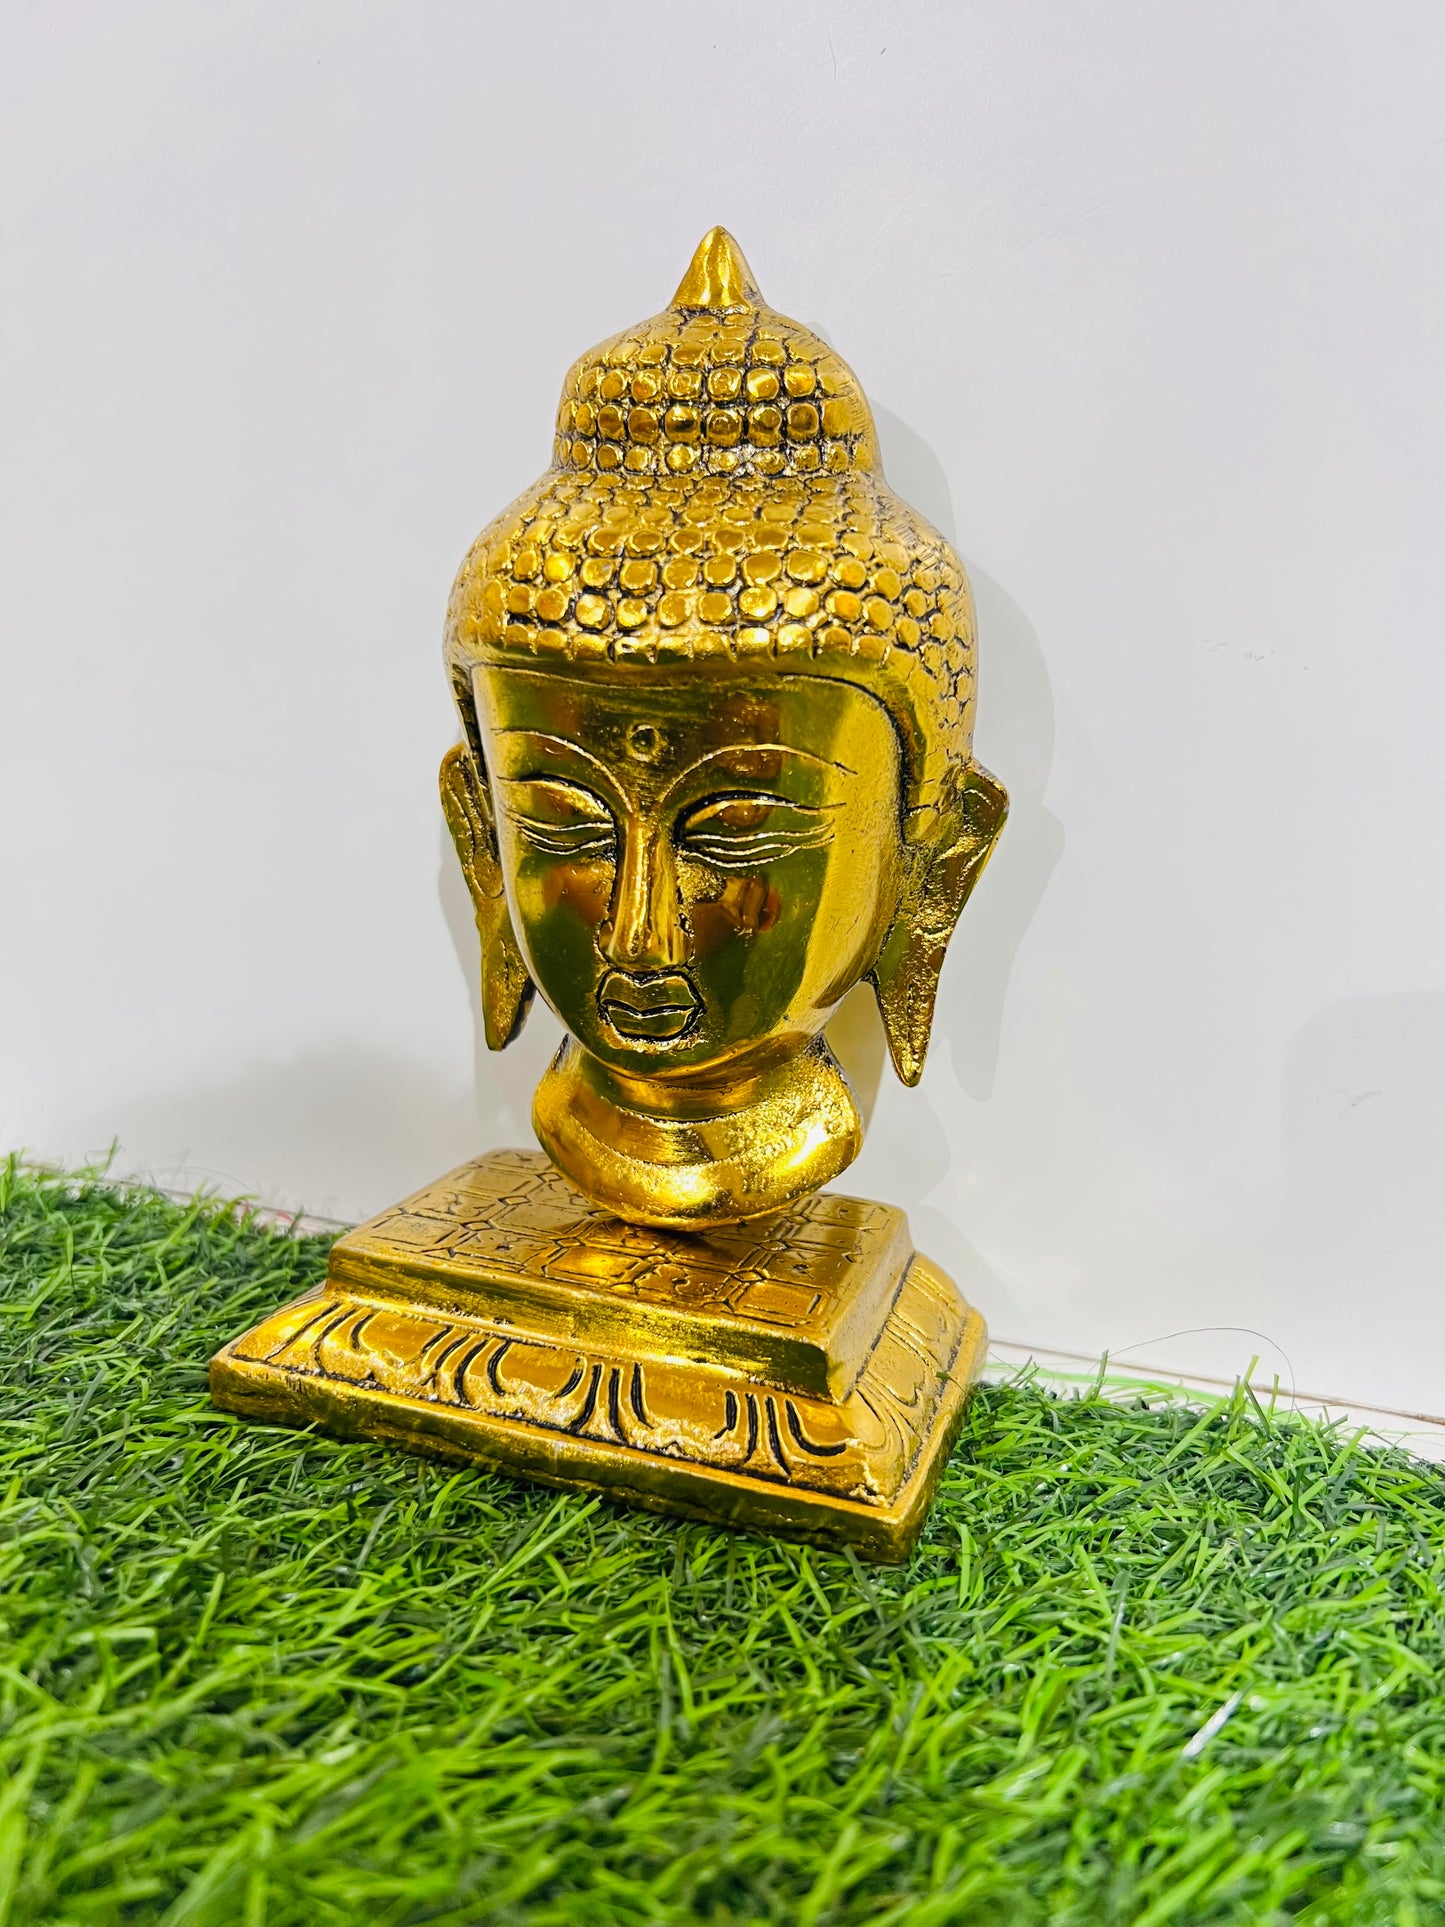 Lord Gautam Buddha MetCHANDNI COLLECTION Buddha Murti Religious Idol for Home Office Decoration & Pooja Gifting Purpose Sculpture